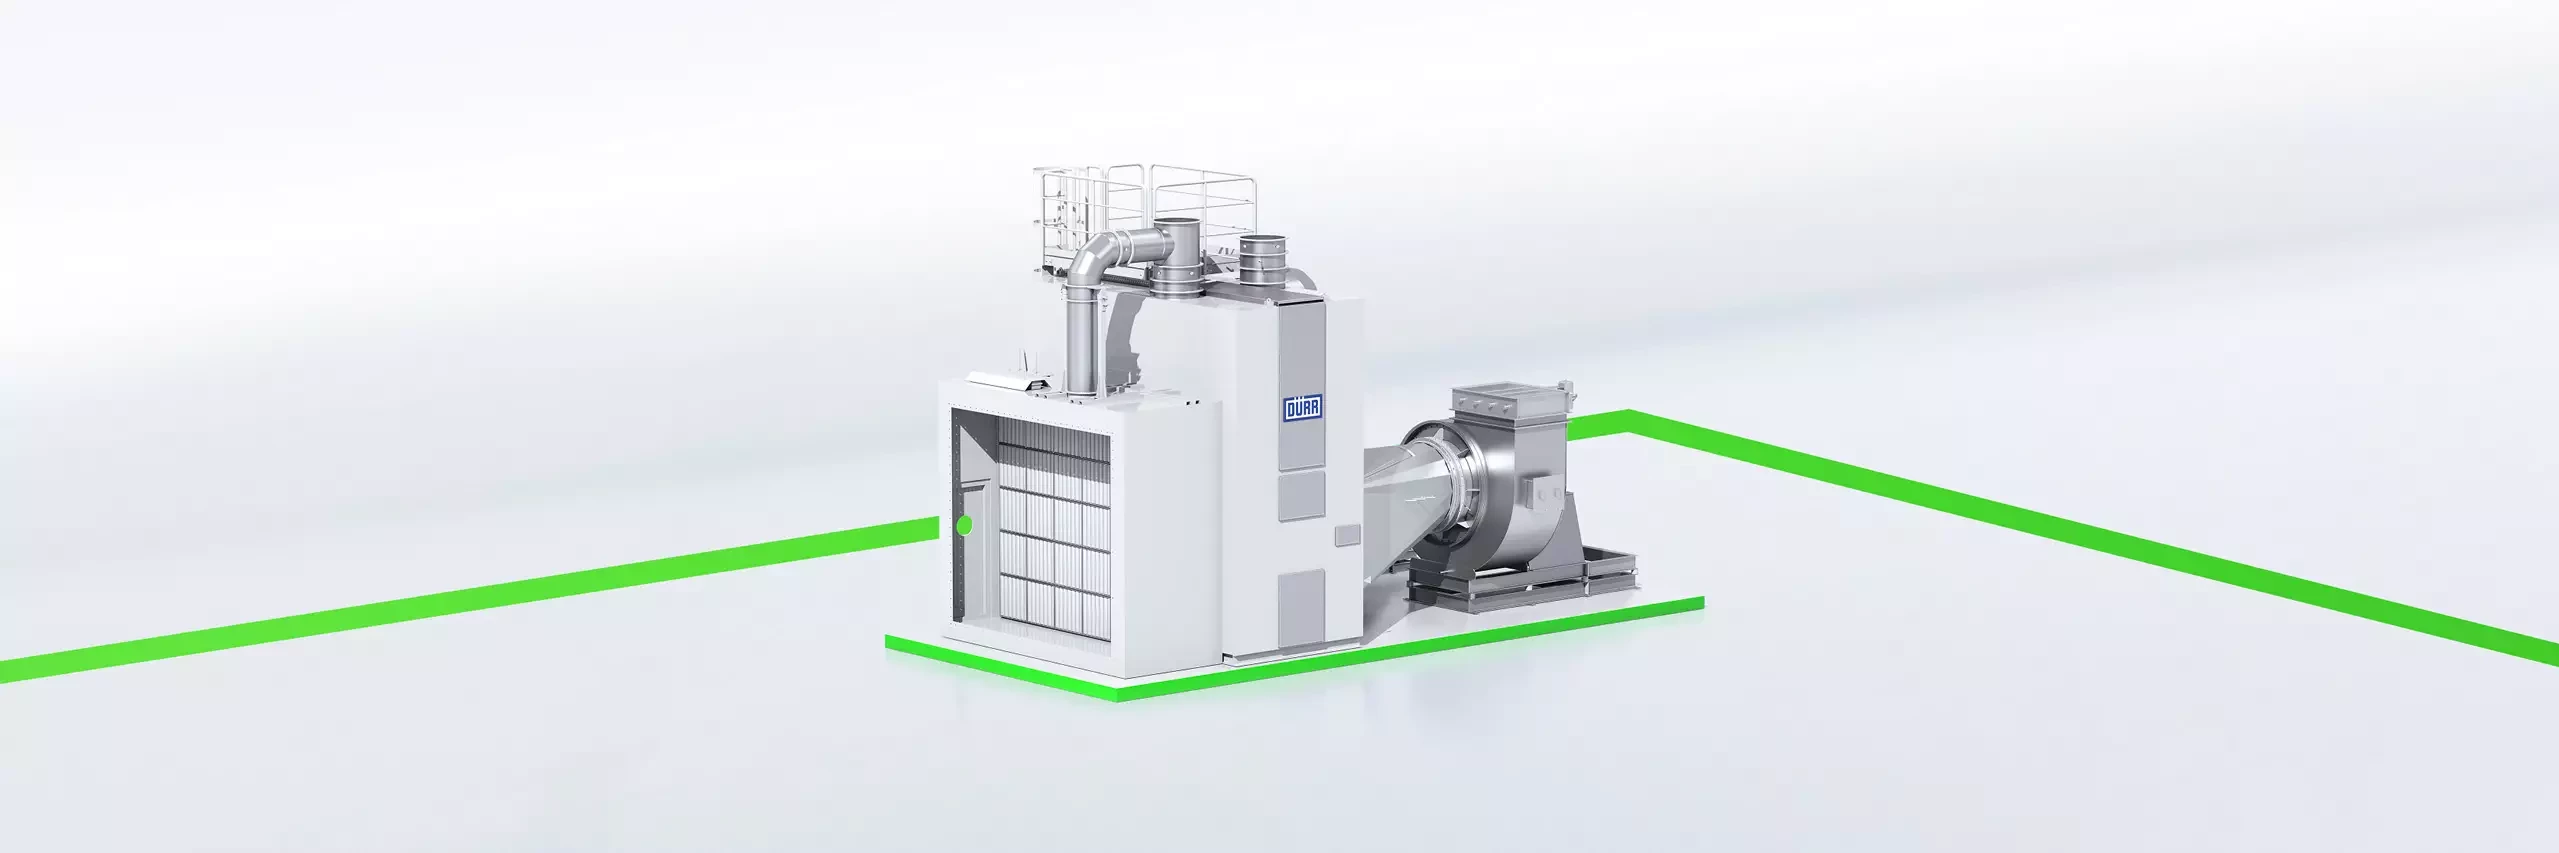 Dürr offers proven solutions for emissions control utilizing both absorption and adsorption technologies